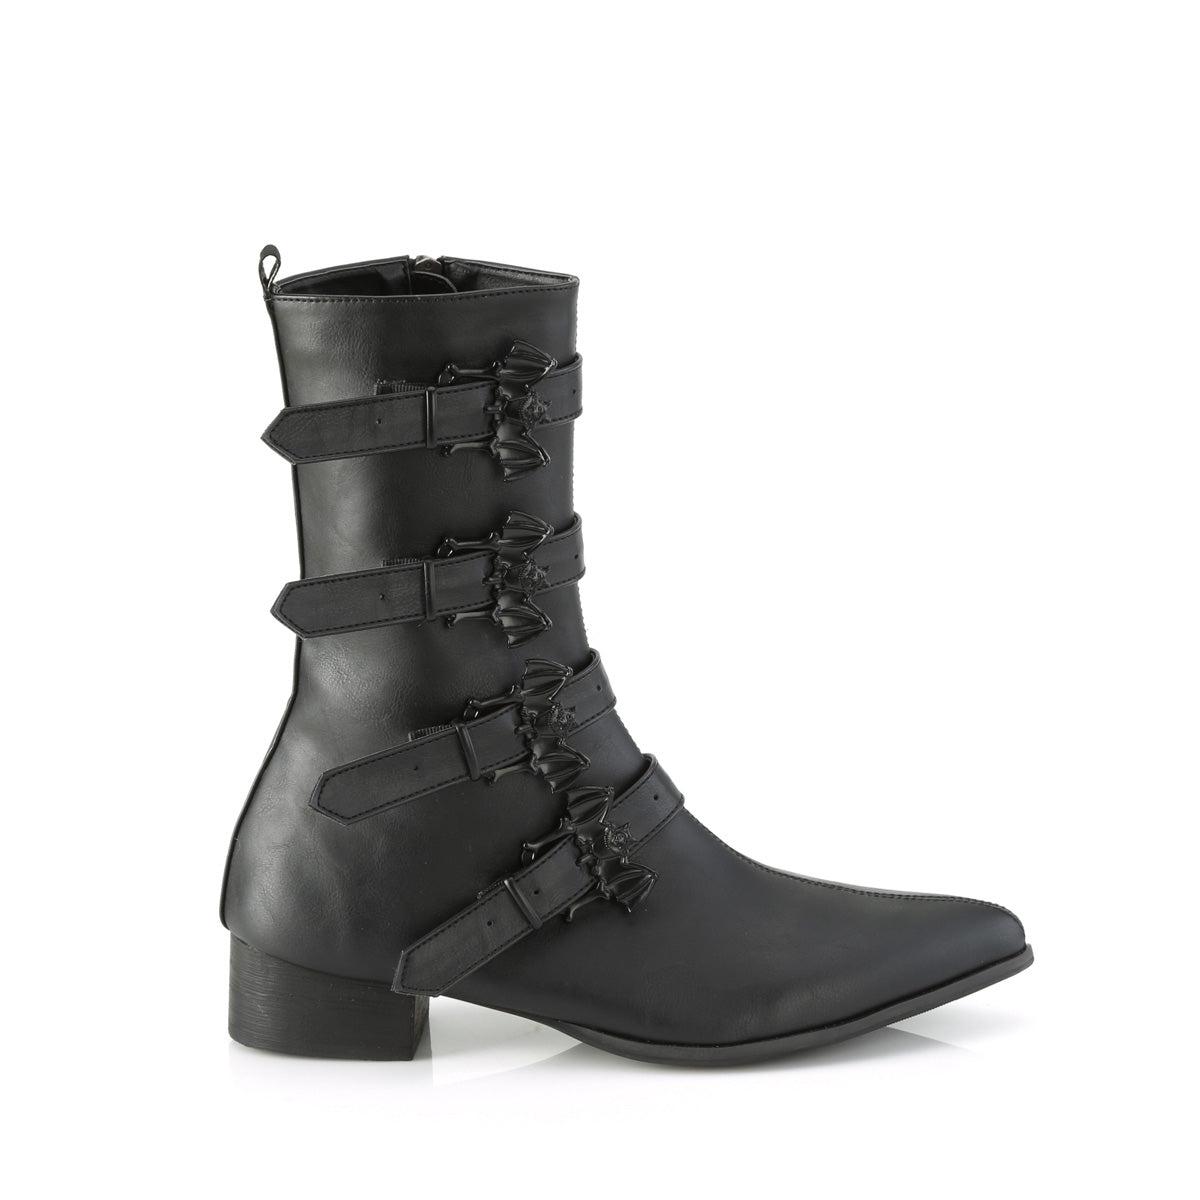 Vampire Lord/Lady Mid-Calf Boots (Unisex)